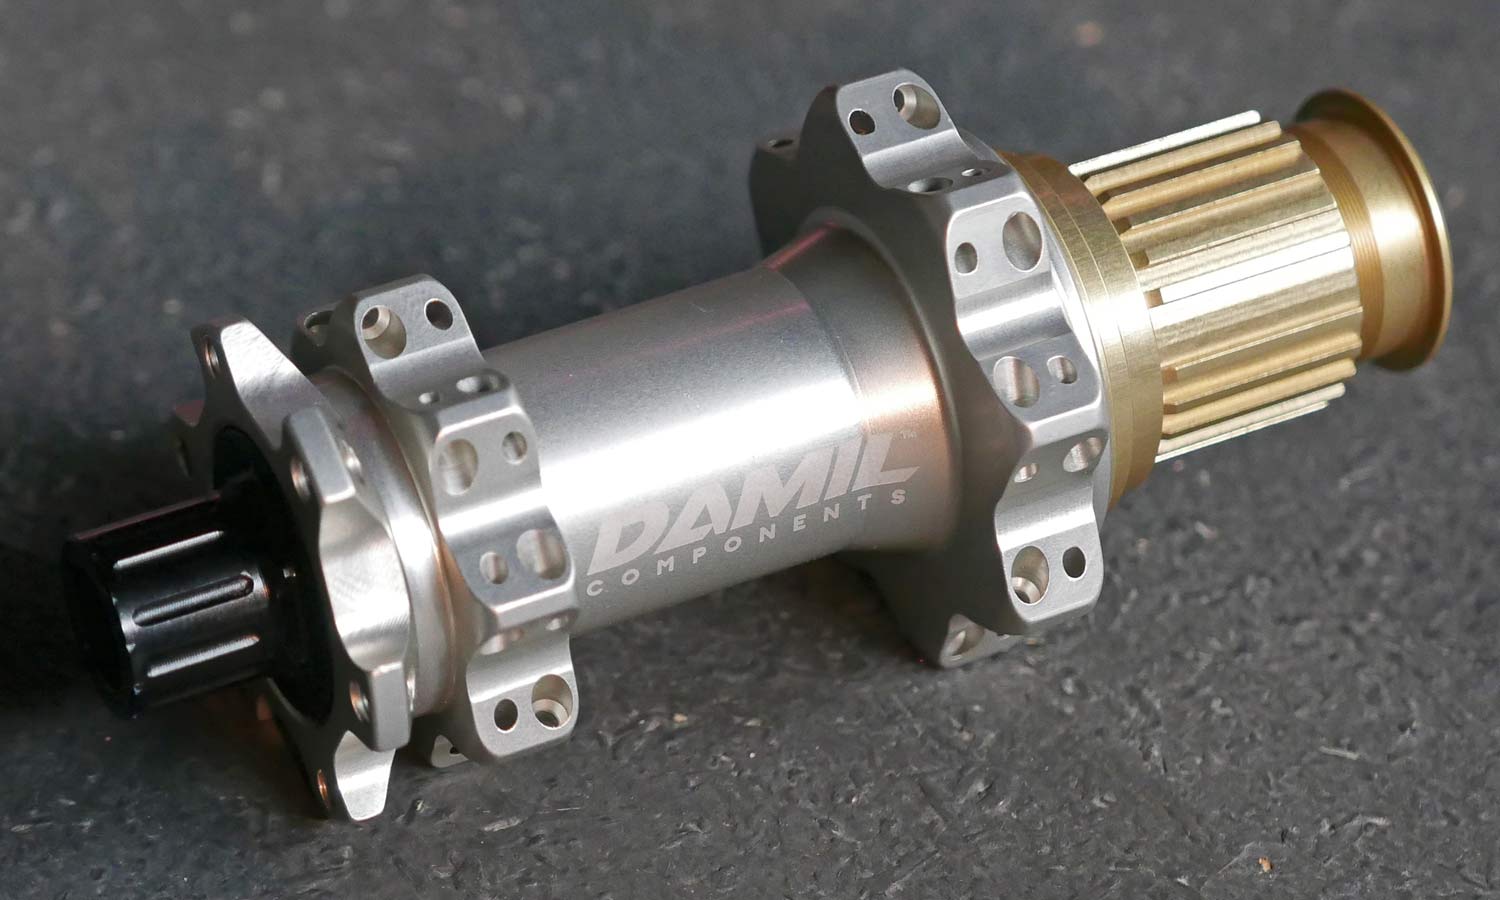 Damil Components machined 7075 alloy aluminum road bike mountain bike hubs made in Italy